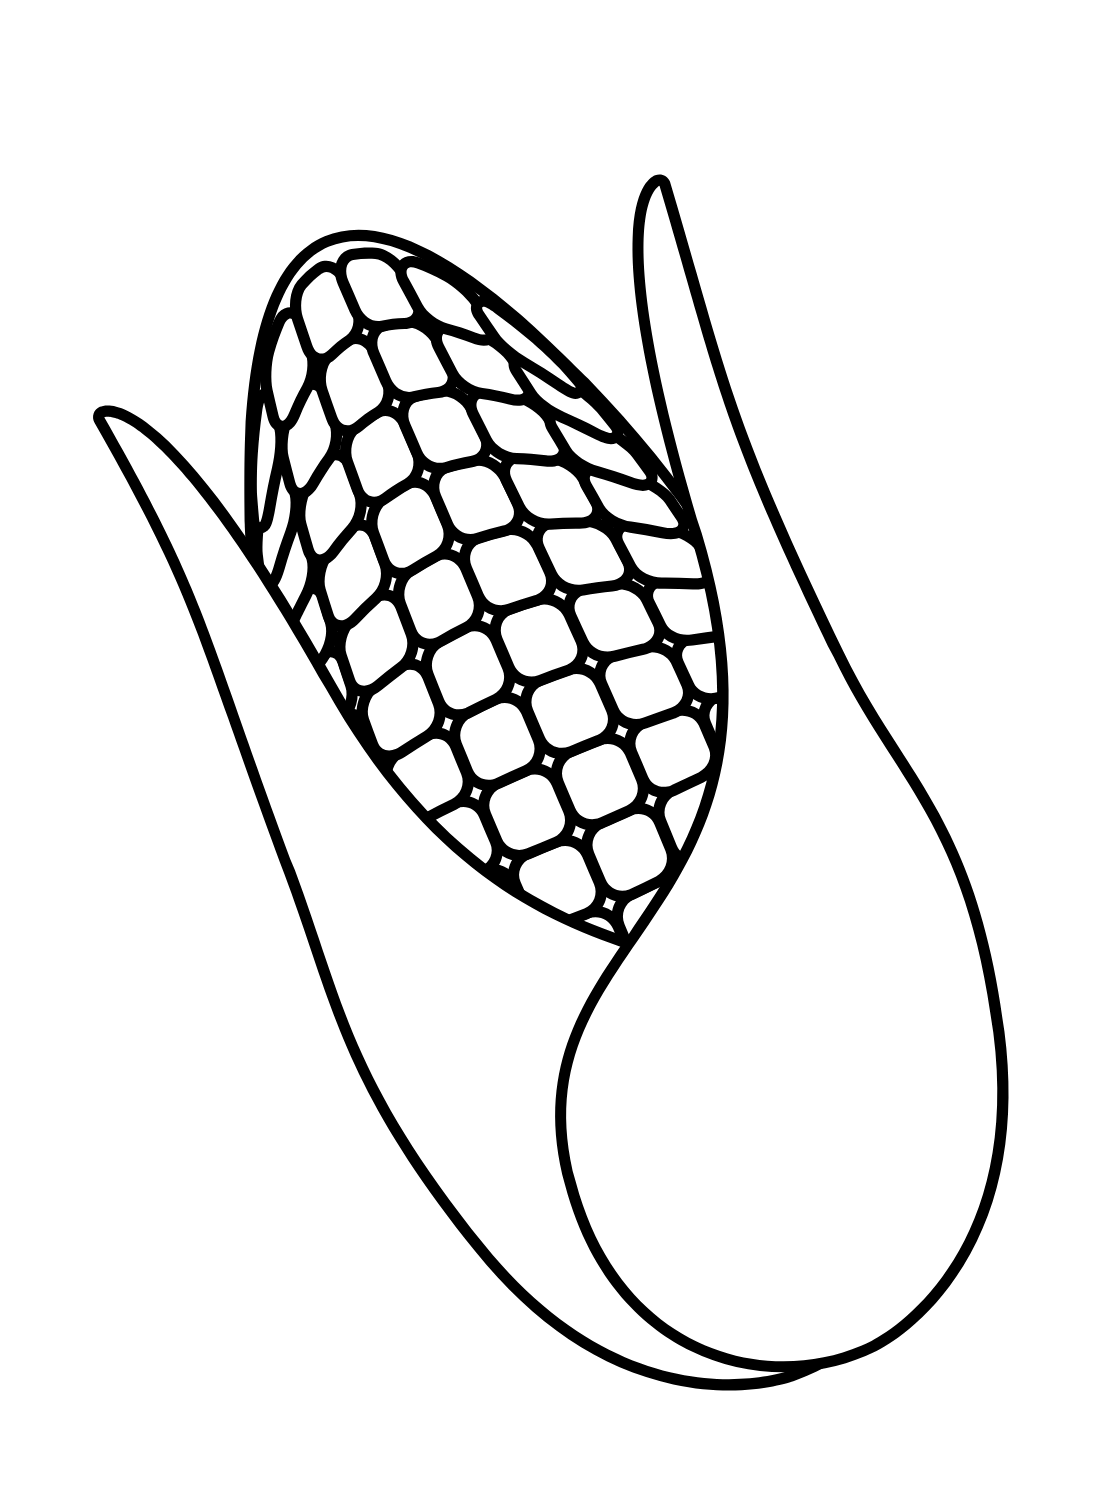 Corn coloring pages printable for free download